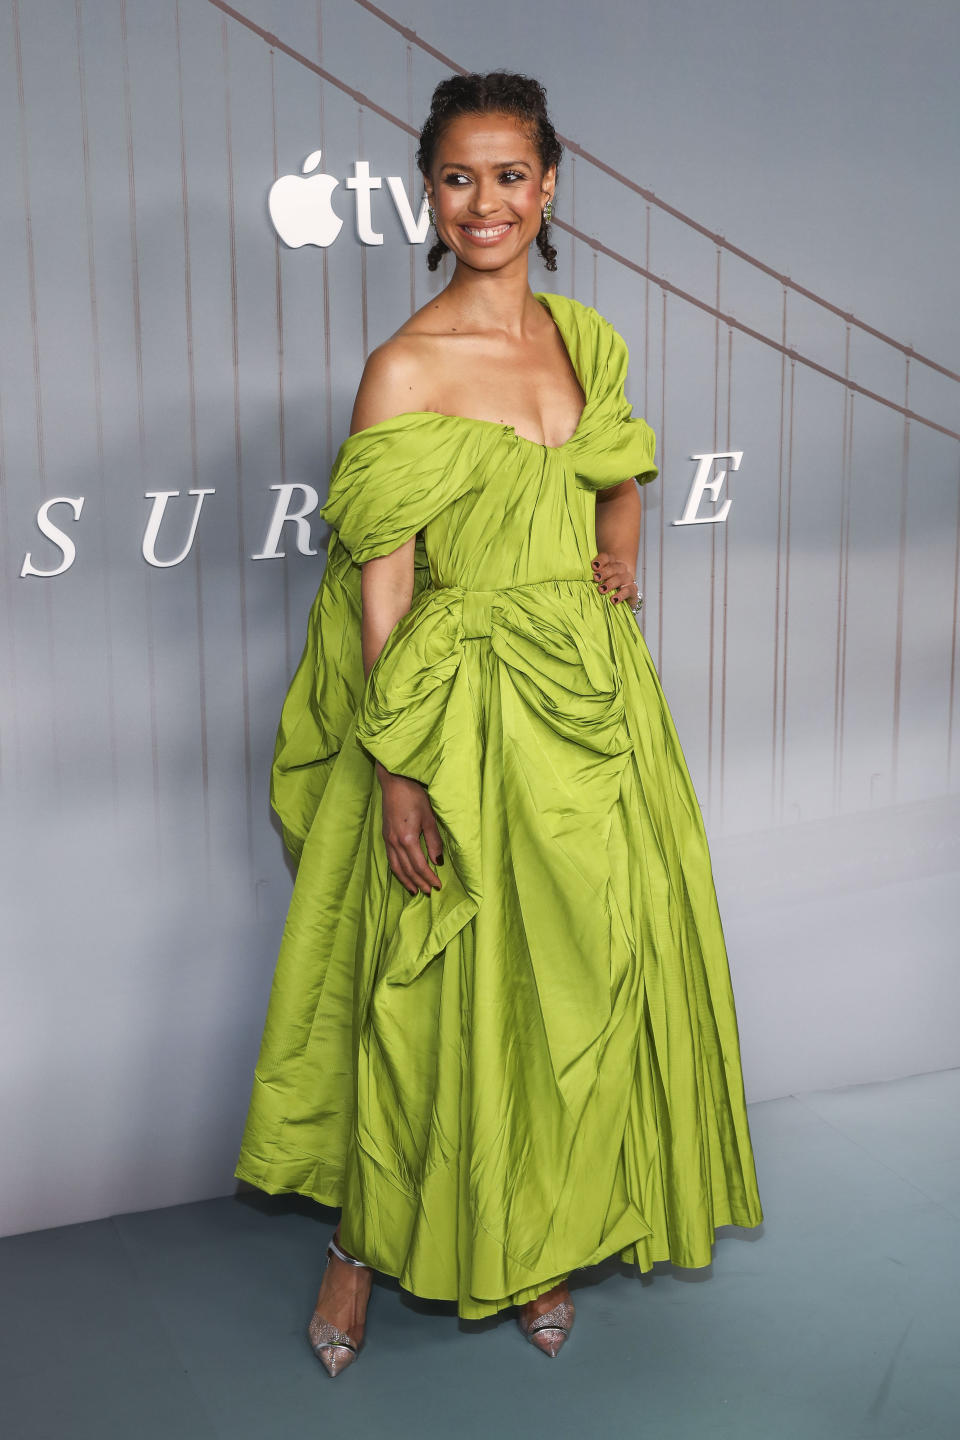 FILE - Gugu Mbatha-Raw attends the Apple TV+ premiere of "Surface" at the Morgan Library on Monday, July 25, 2022, in New York. Mbatha-Raw turns 40 on April 21. (Photo by Andy Kropa/Invision/AP, File)